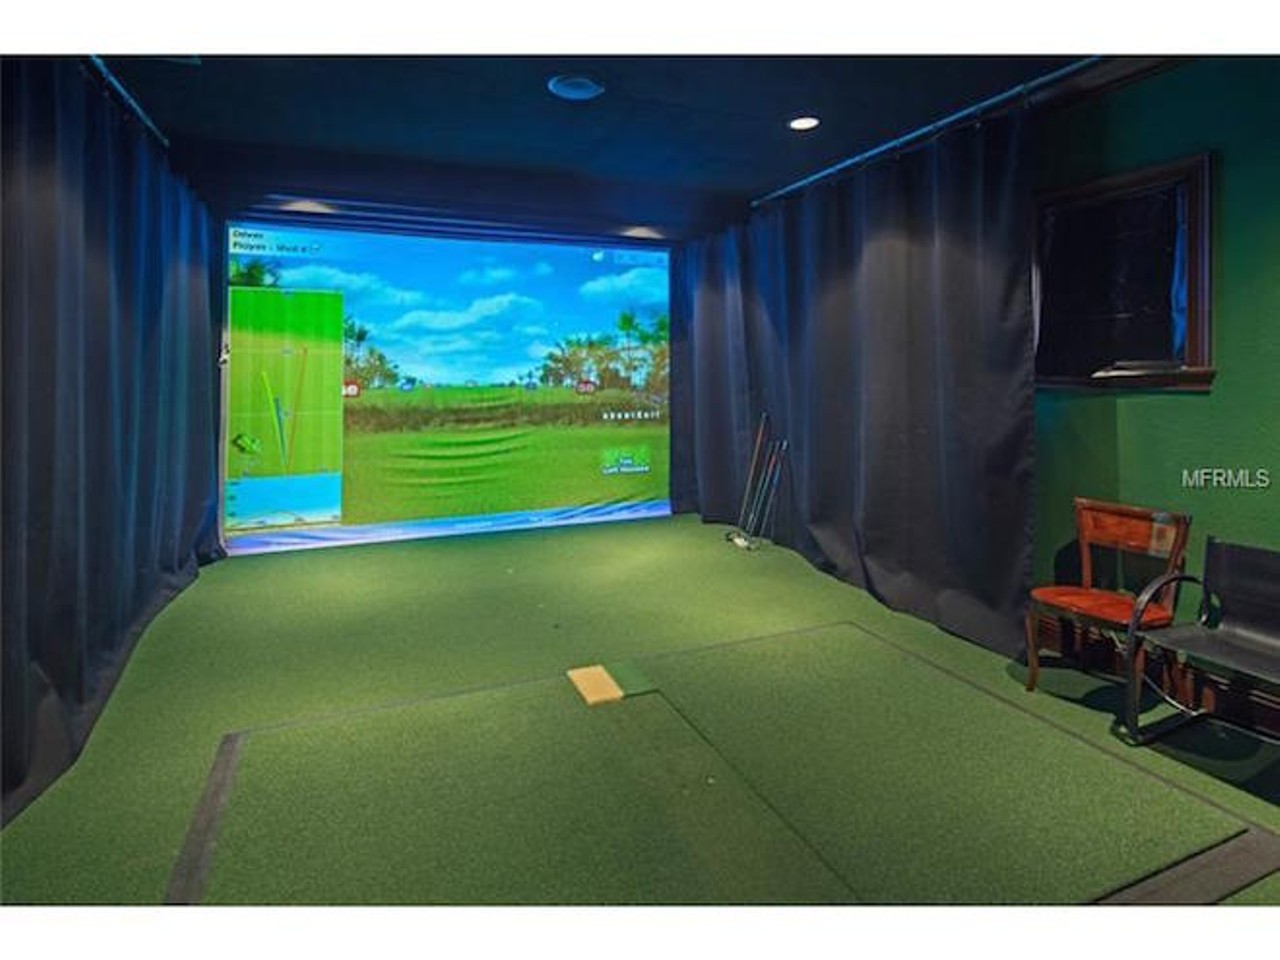 And look: It has an indoor driving range with video screen.